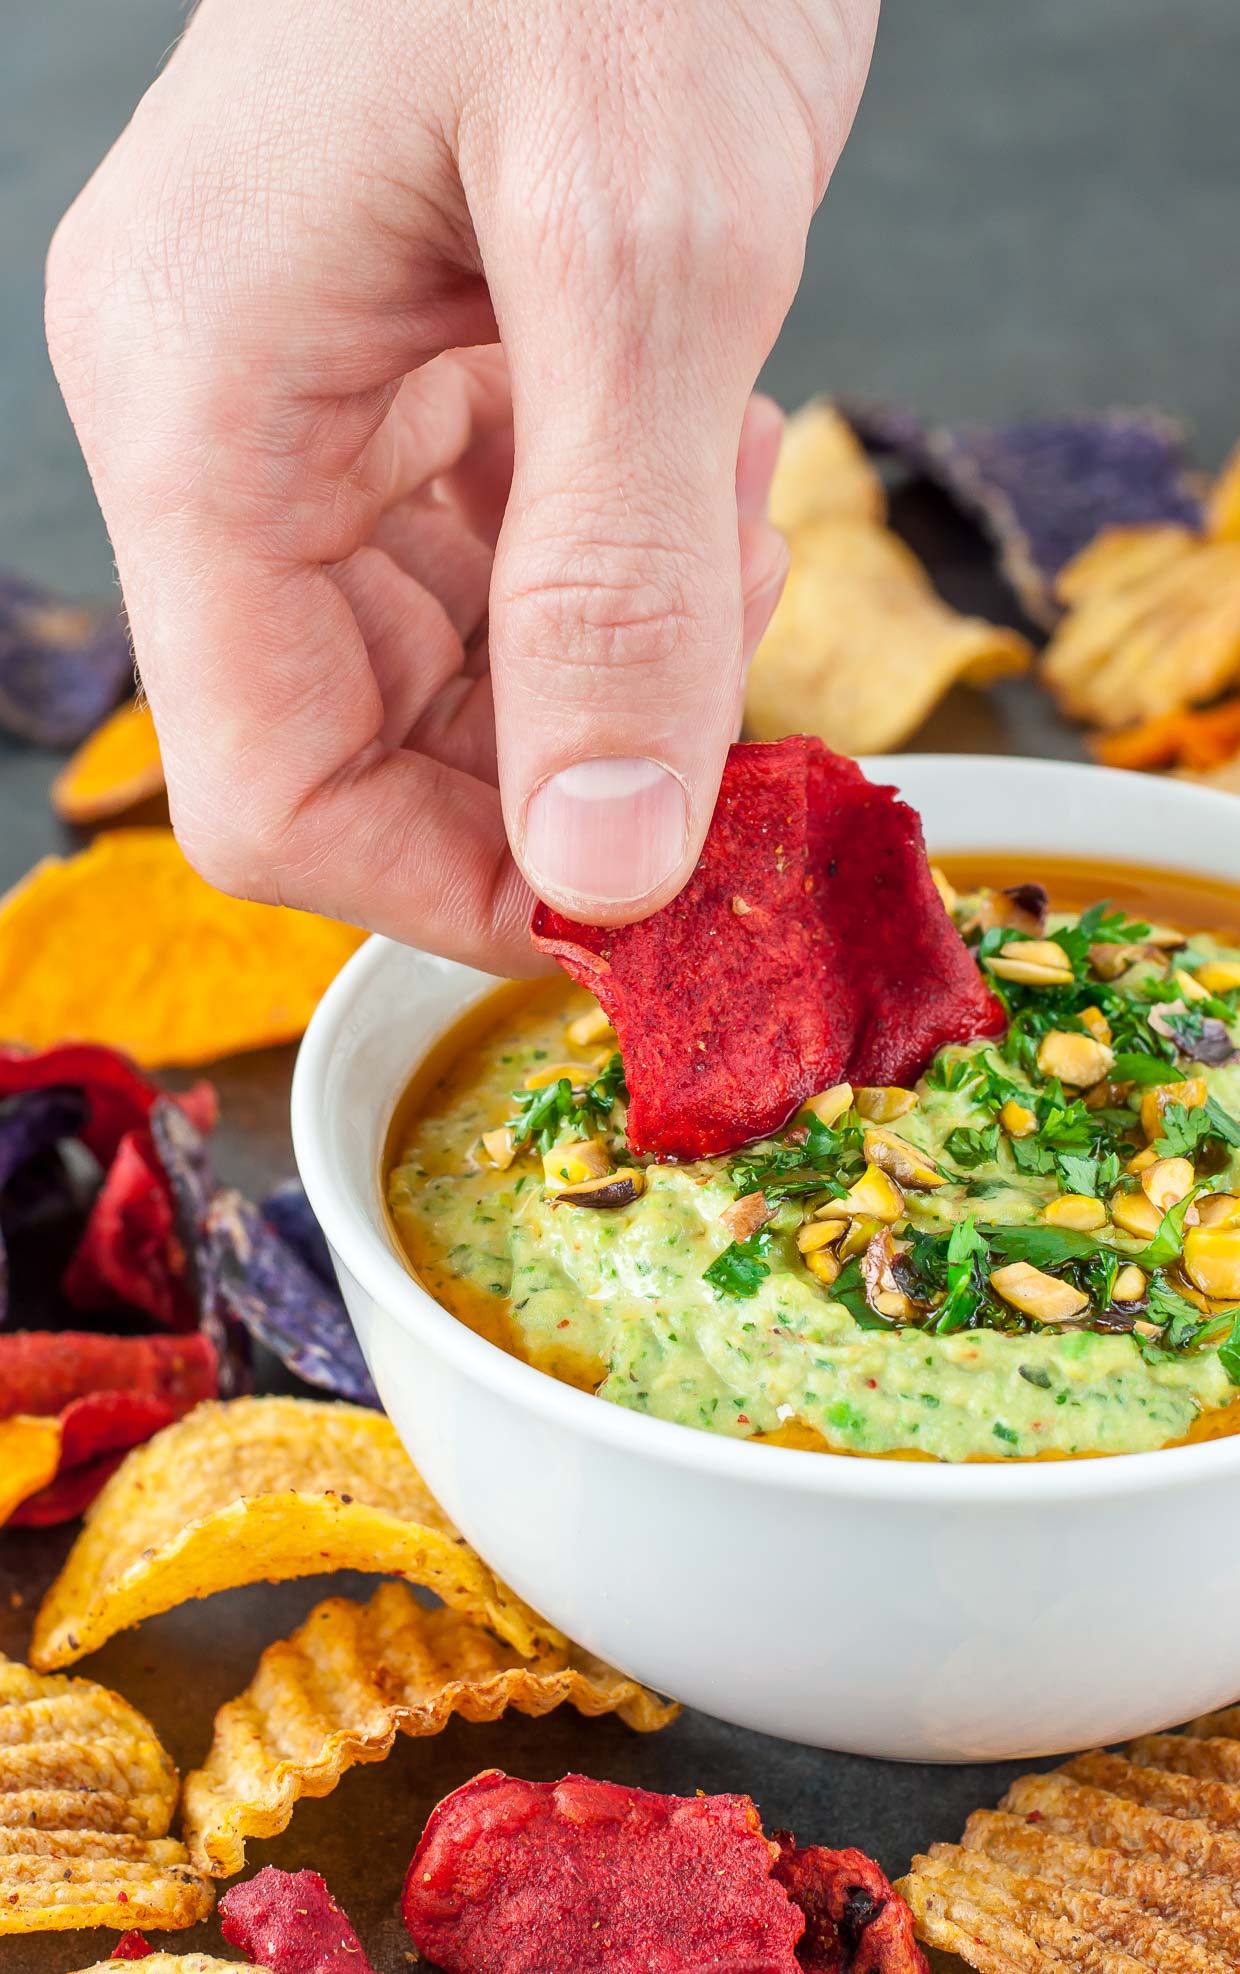 Mix up your dipping routine with this Cilantro Pistachio Hummus! Great for snacking, this gorgeous green hummus is quick, easy, and full of flavor!